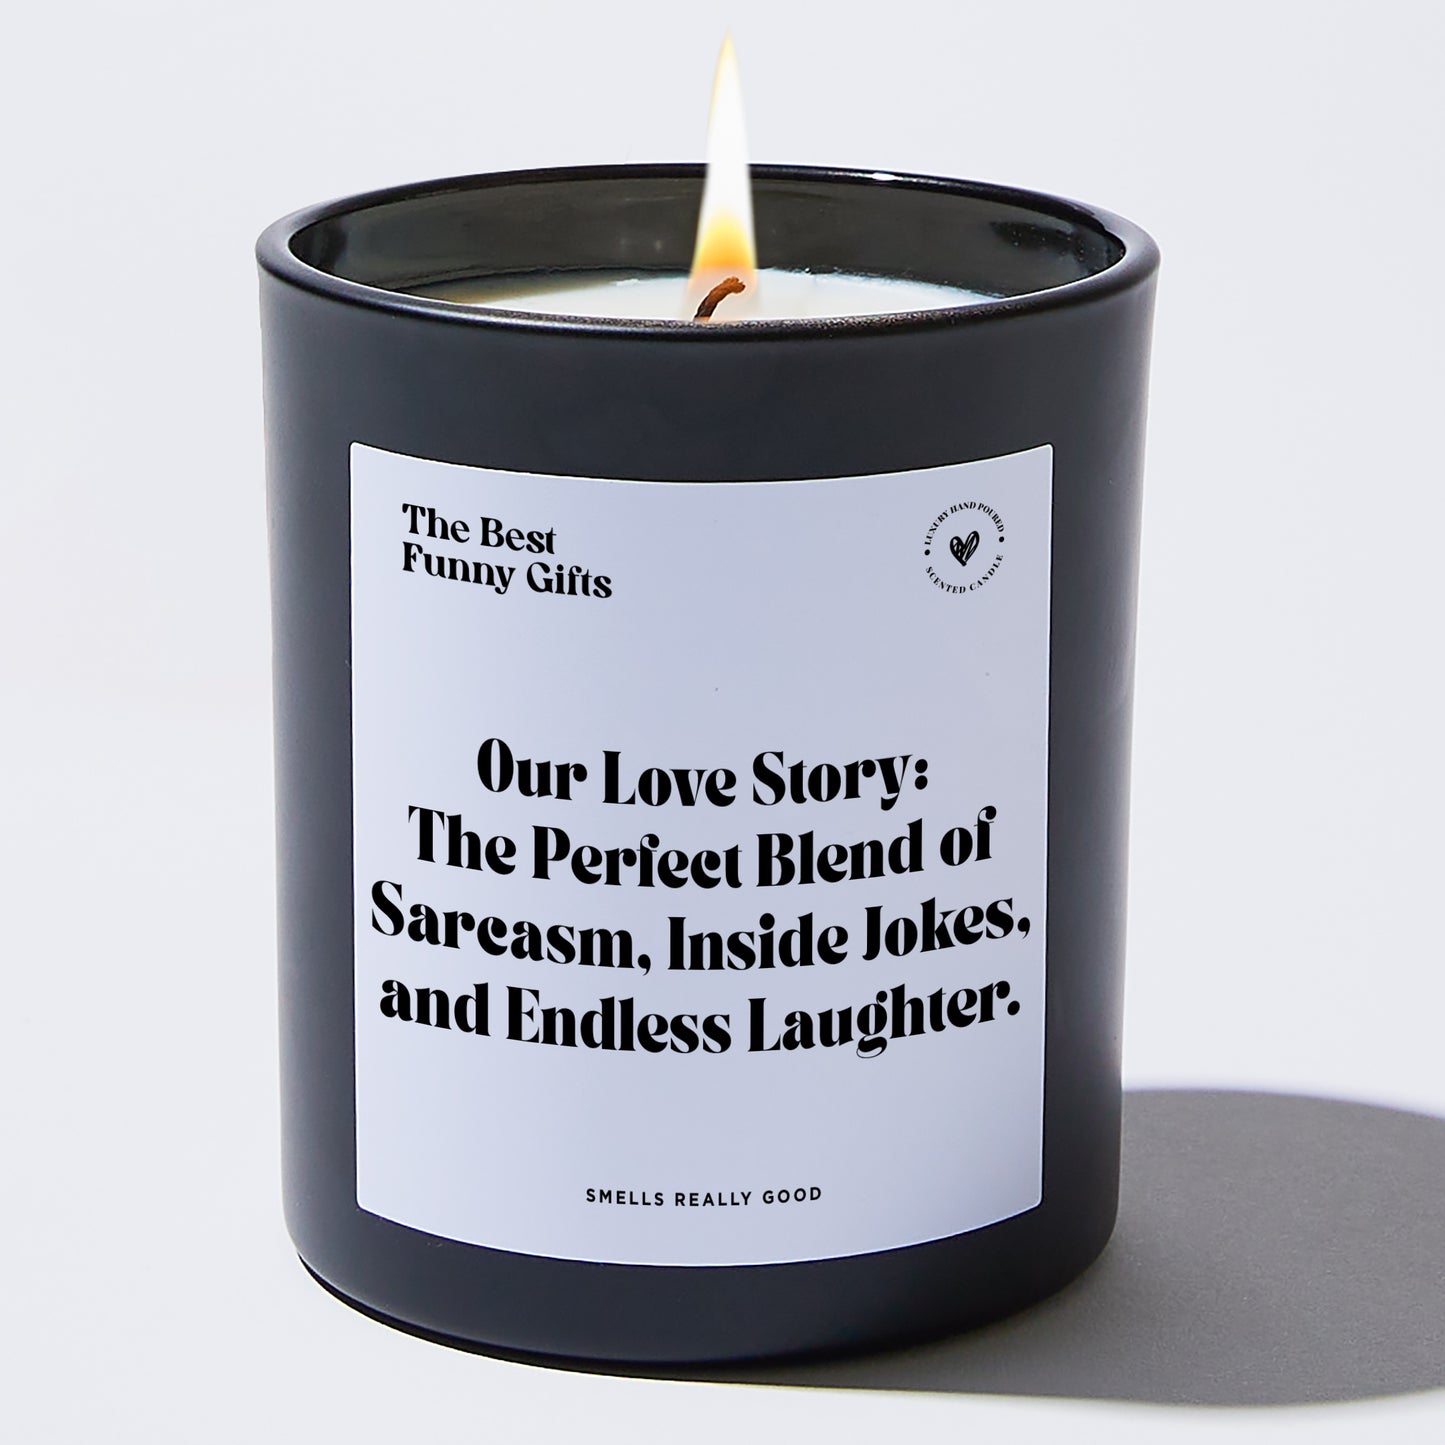 Anniversary Present - Our Love Story: The Perfect Blend of Sarcasm, Inside Jokes, and Endless Laughter. - Candle